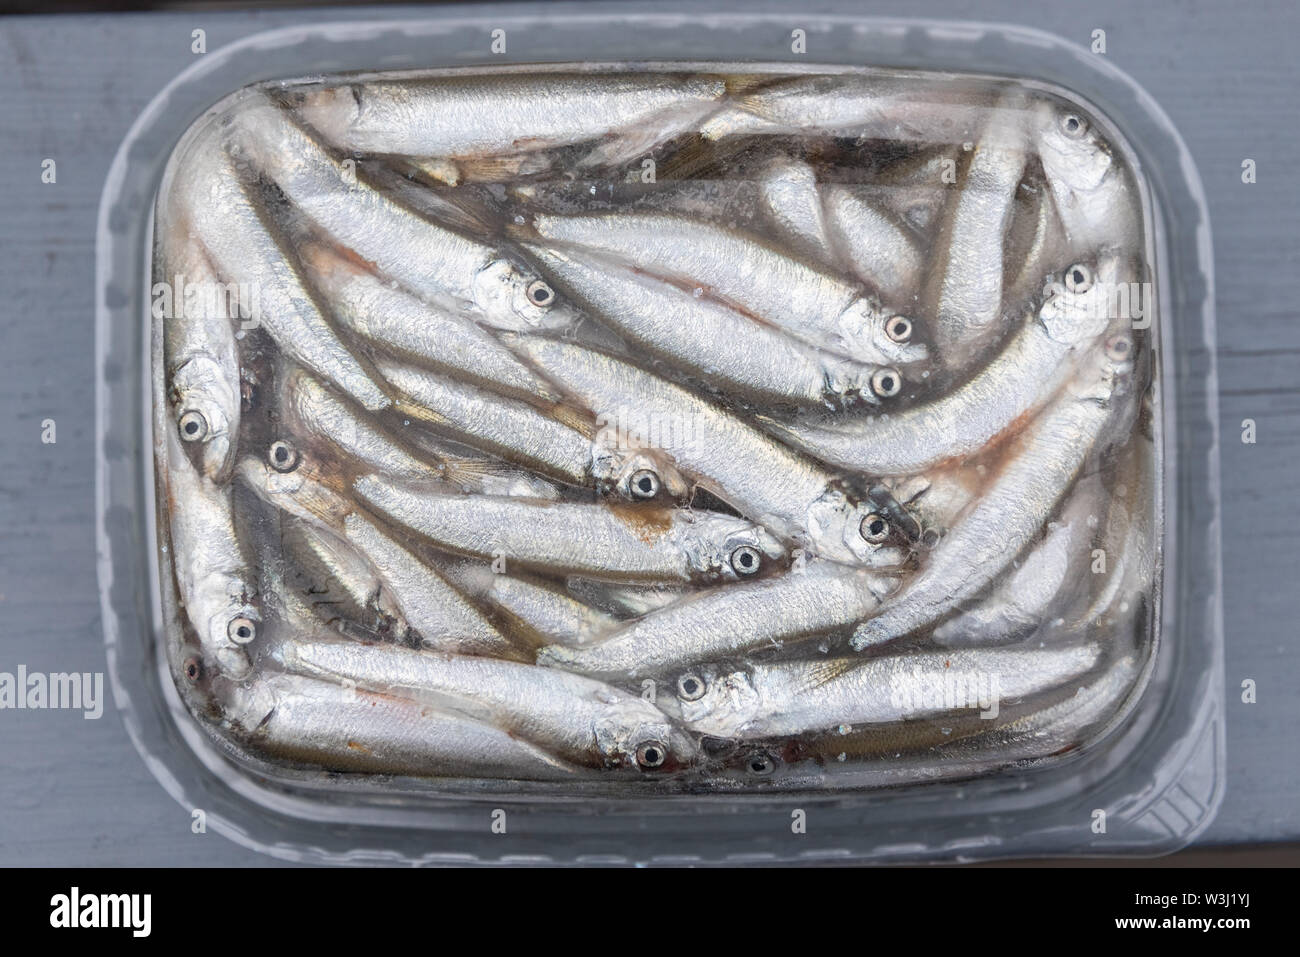 https://c8.alamy.com/comp/W3J1YJ/frozen-anchovies-a-bunch-of-small-fish-for-sale-W3J1YJ.jpg